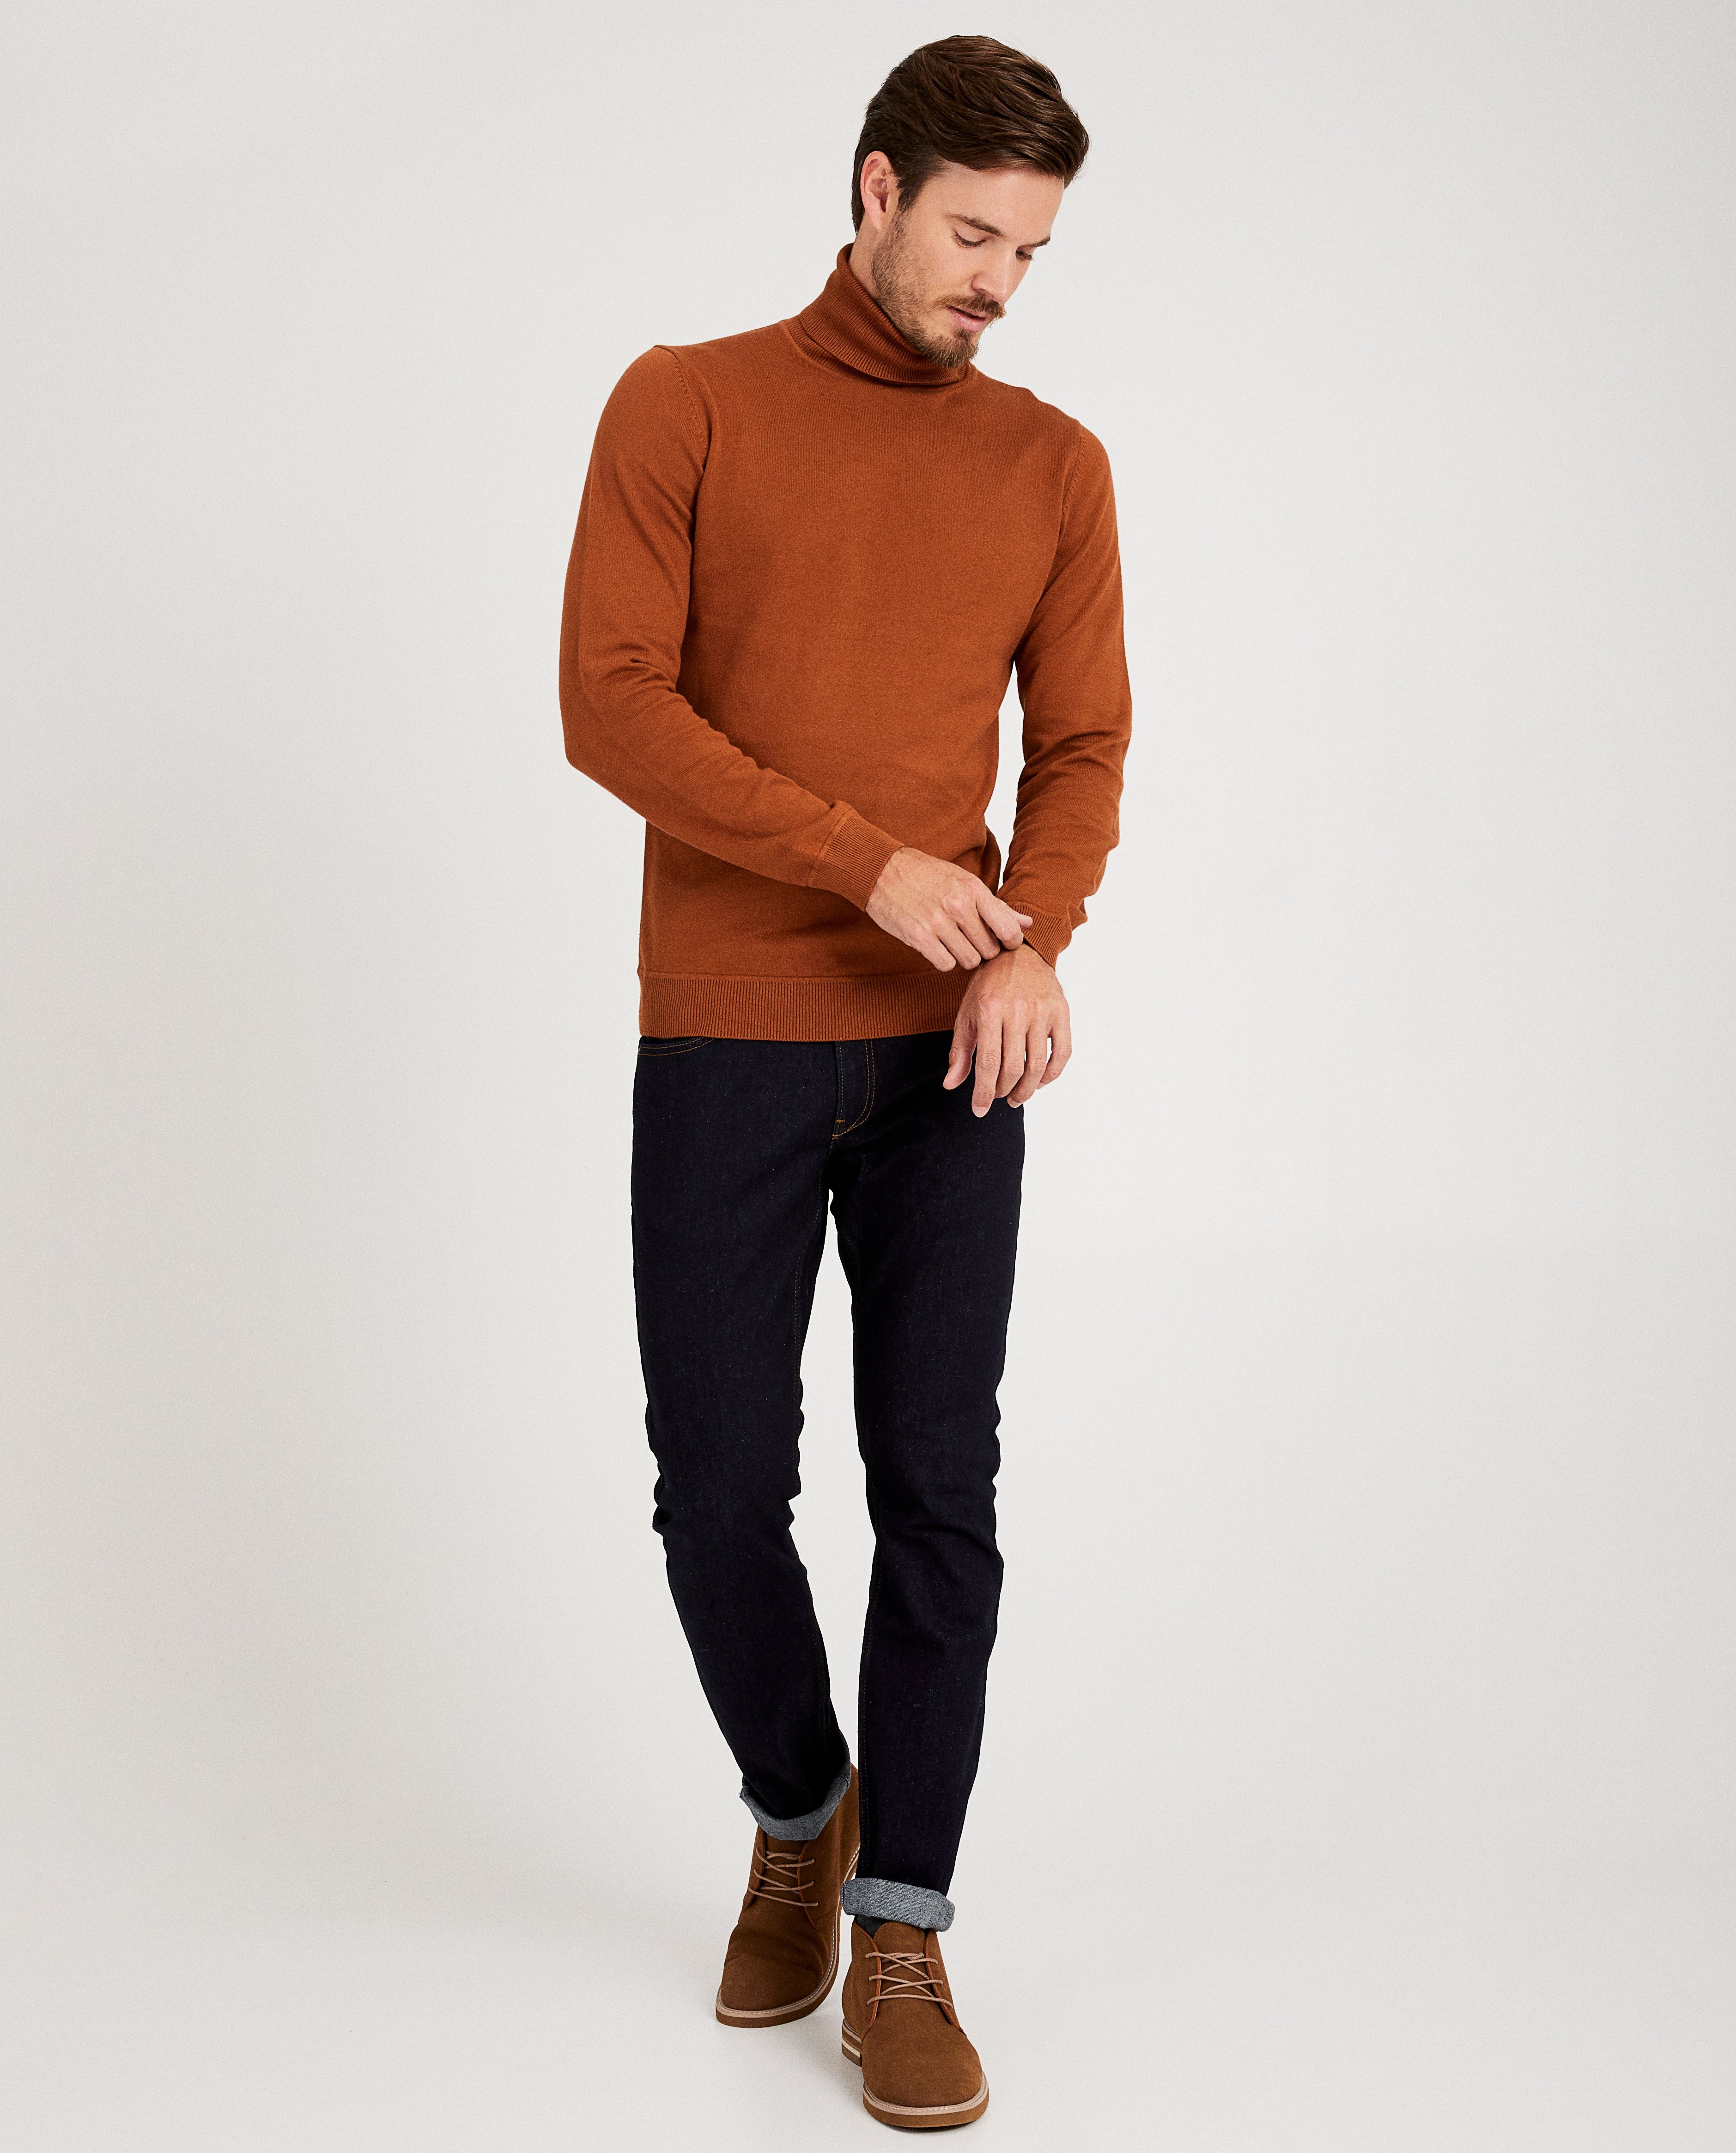 Sous-pull cognac - fin tricot - Iveo